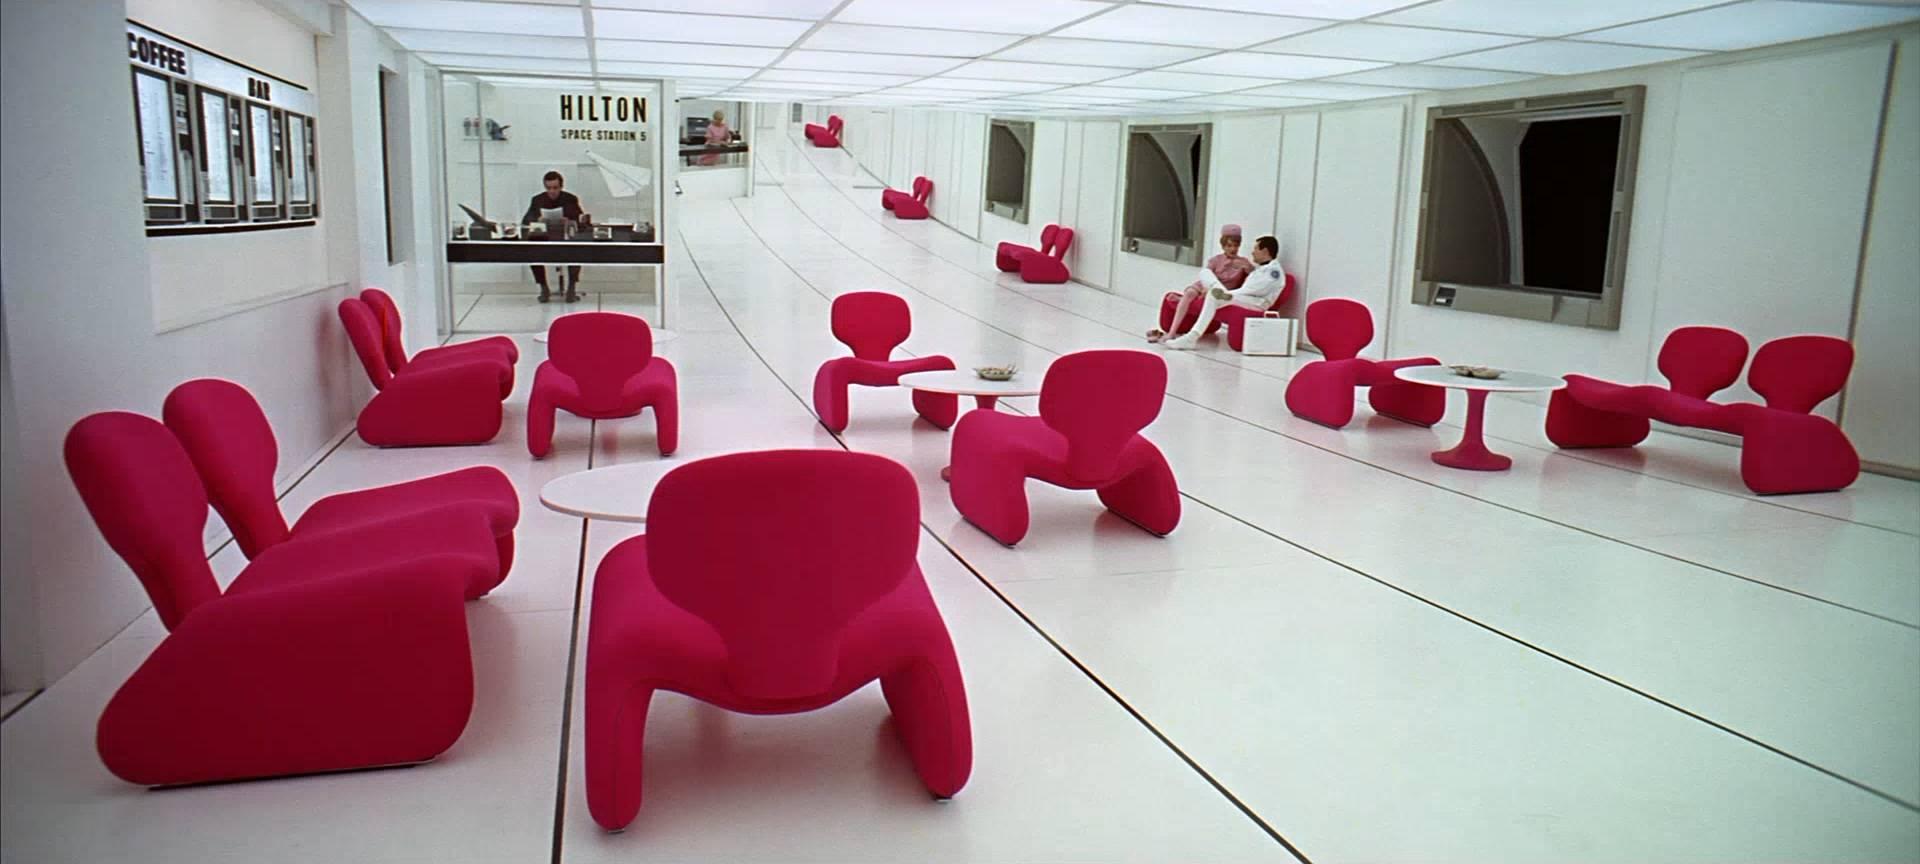 1965 Djinn Chaise by Olivier Mourque for Airborne International 2